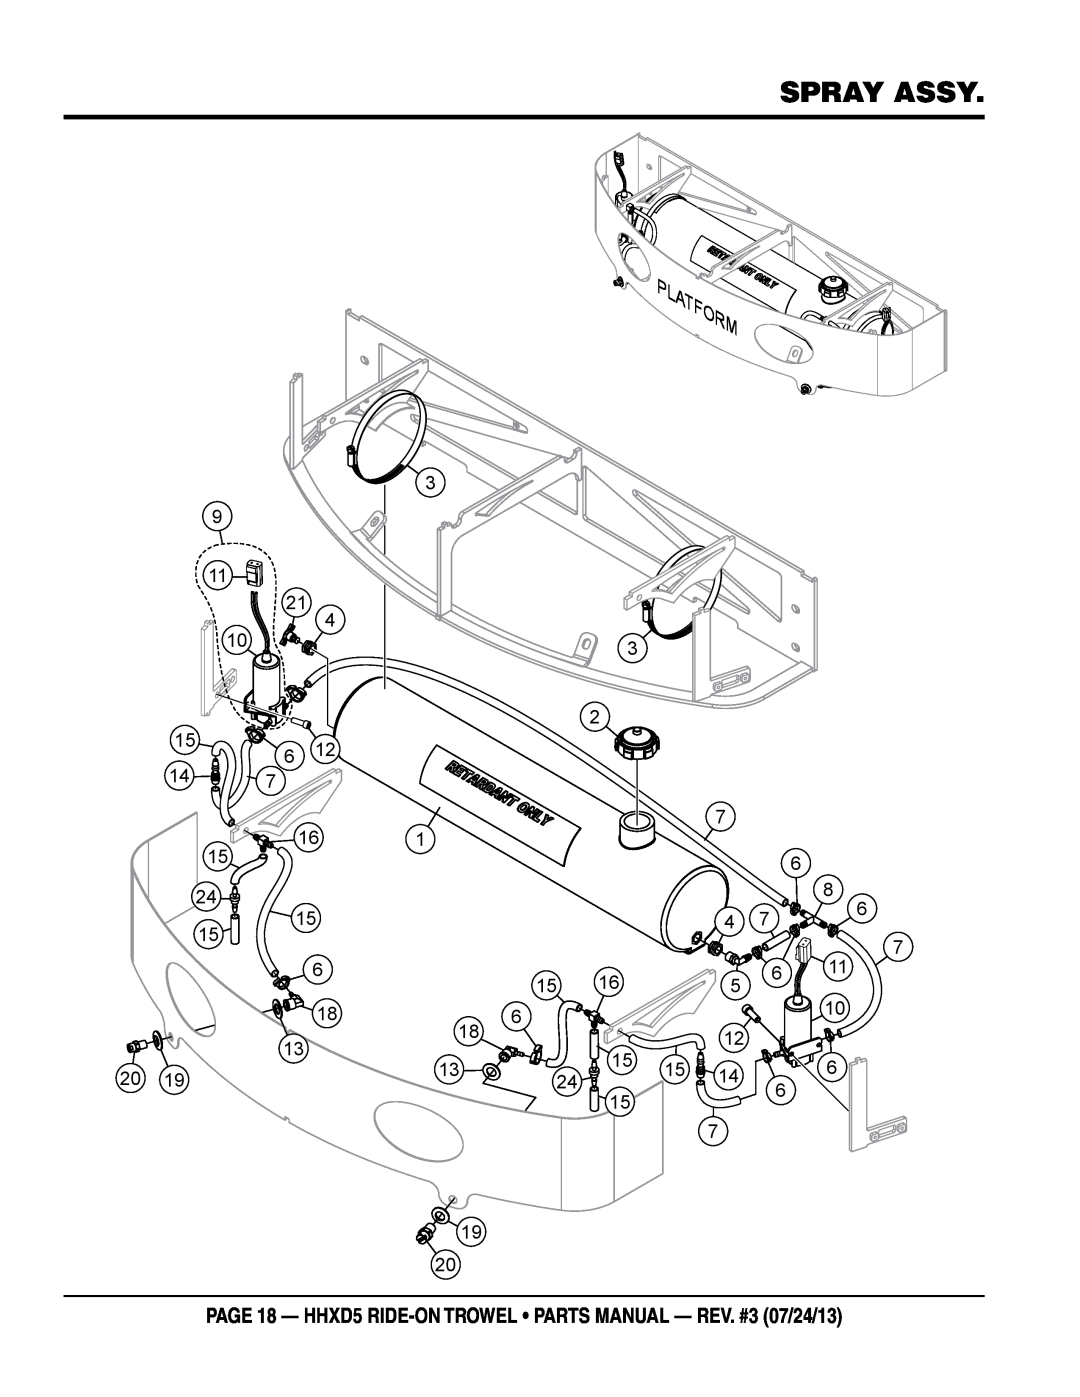 Multiquip HHSD5 sPRAY ASSY, page 18 - HHXD5 RIDE-ON TROWEL parts manual - rev. #3 07/24/13 